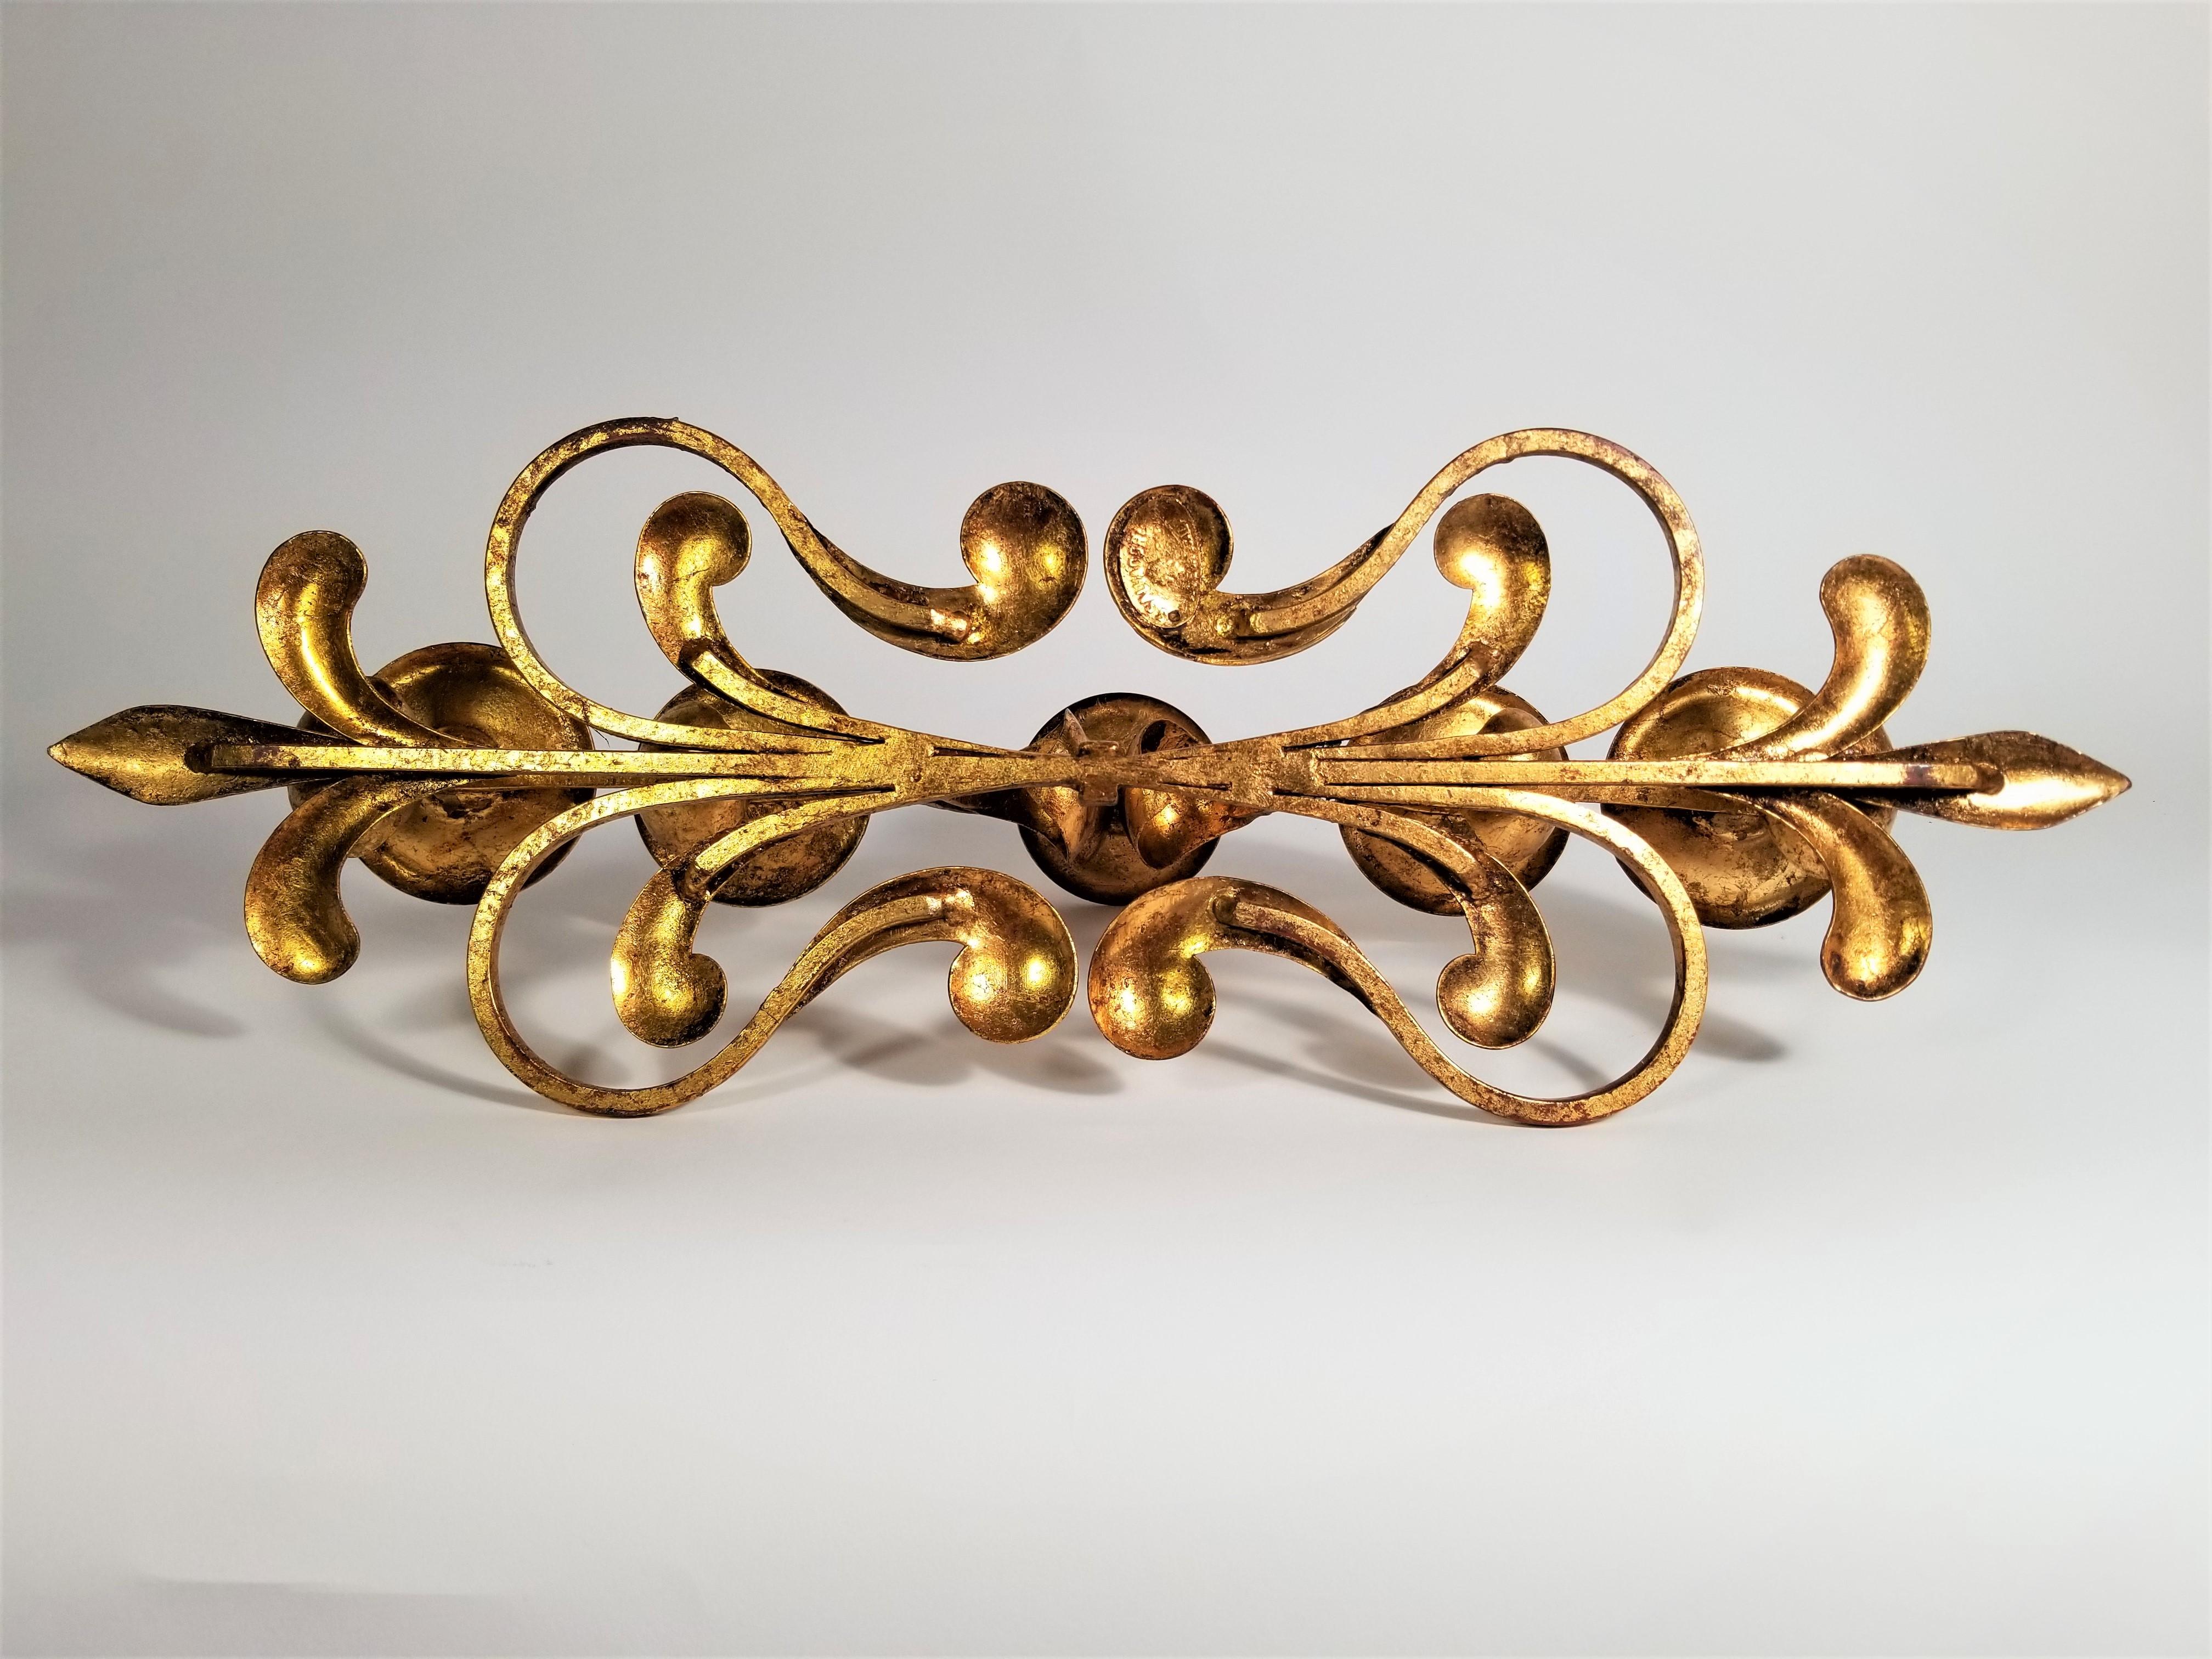 Italian Signed S. Salvadori  Gilded Candelabra, 1950s  Made in Italy For Sale 10